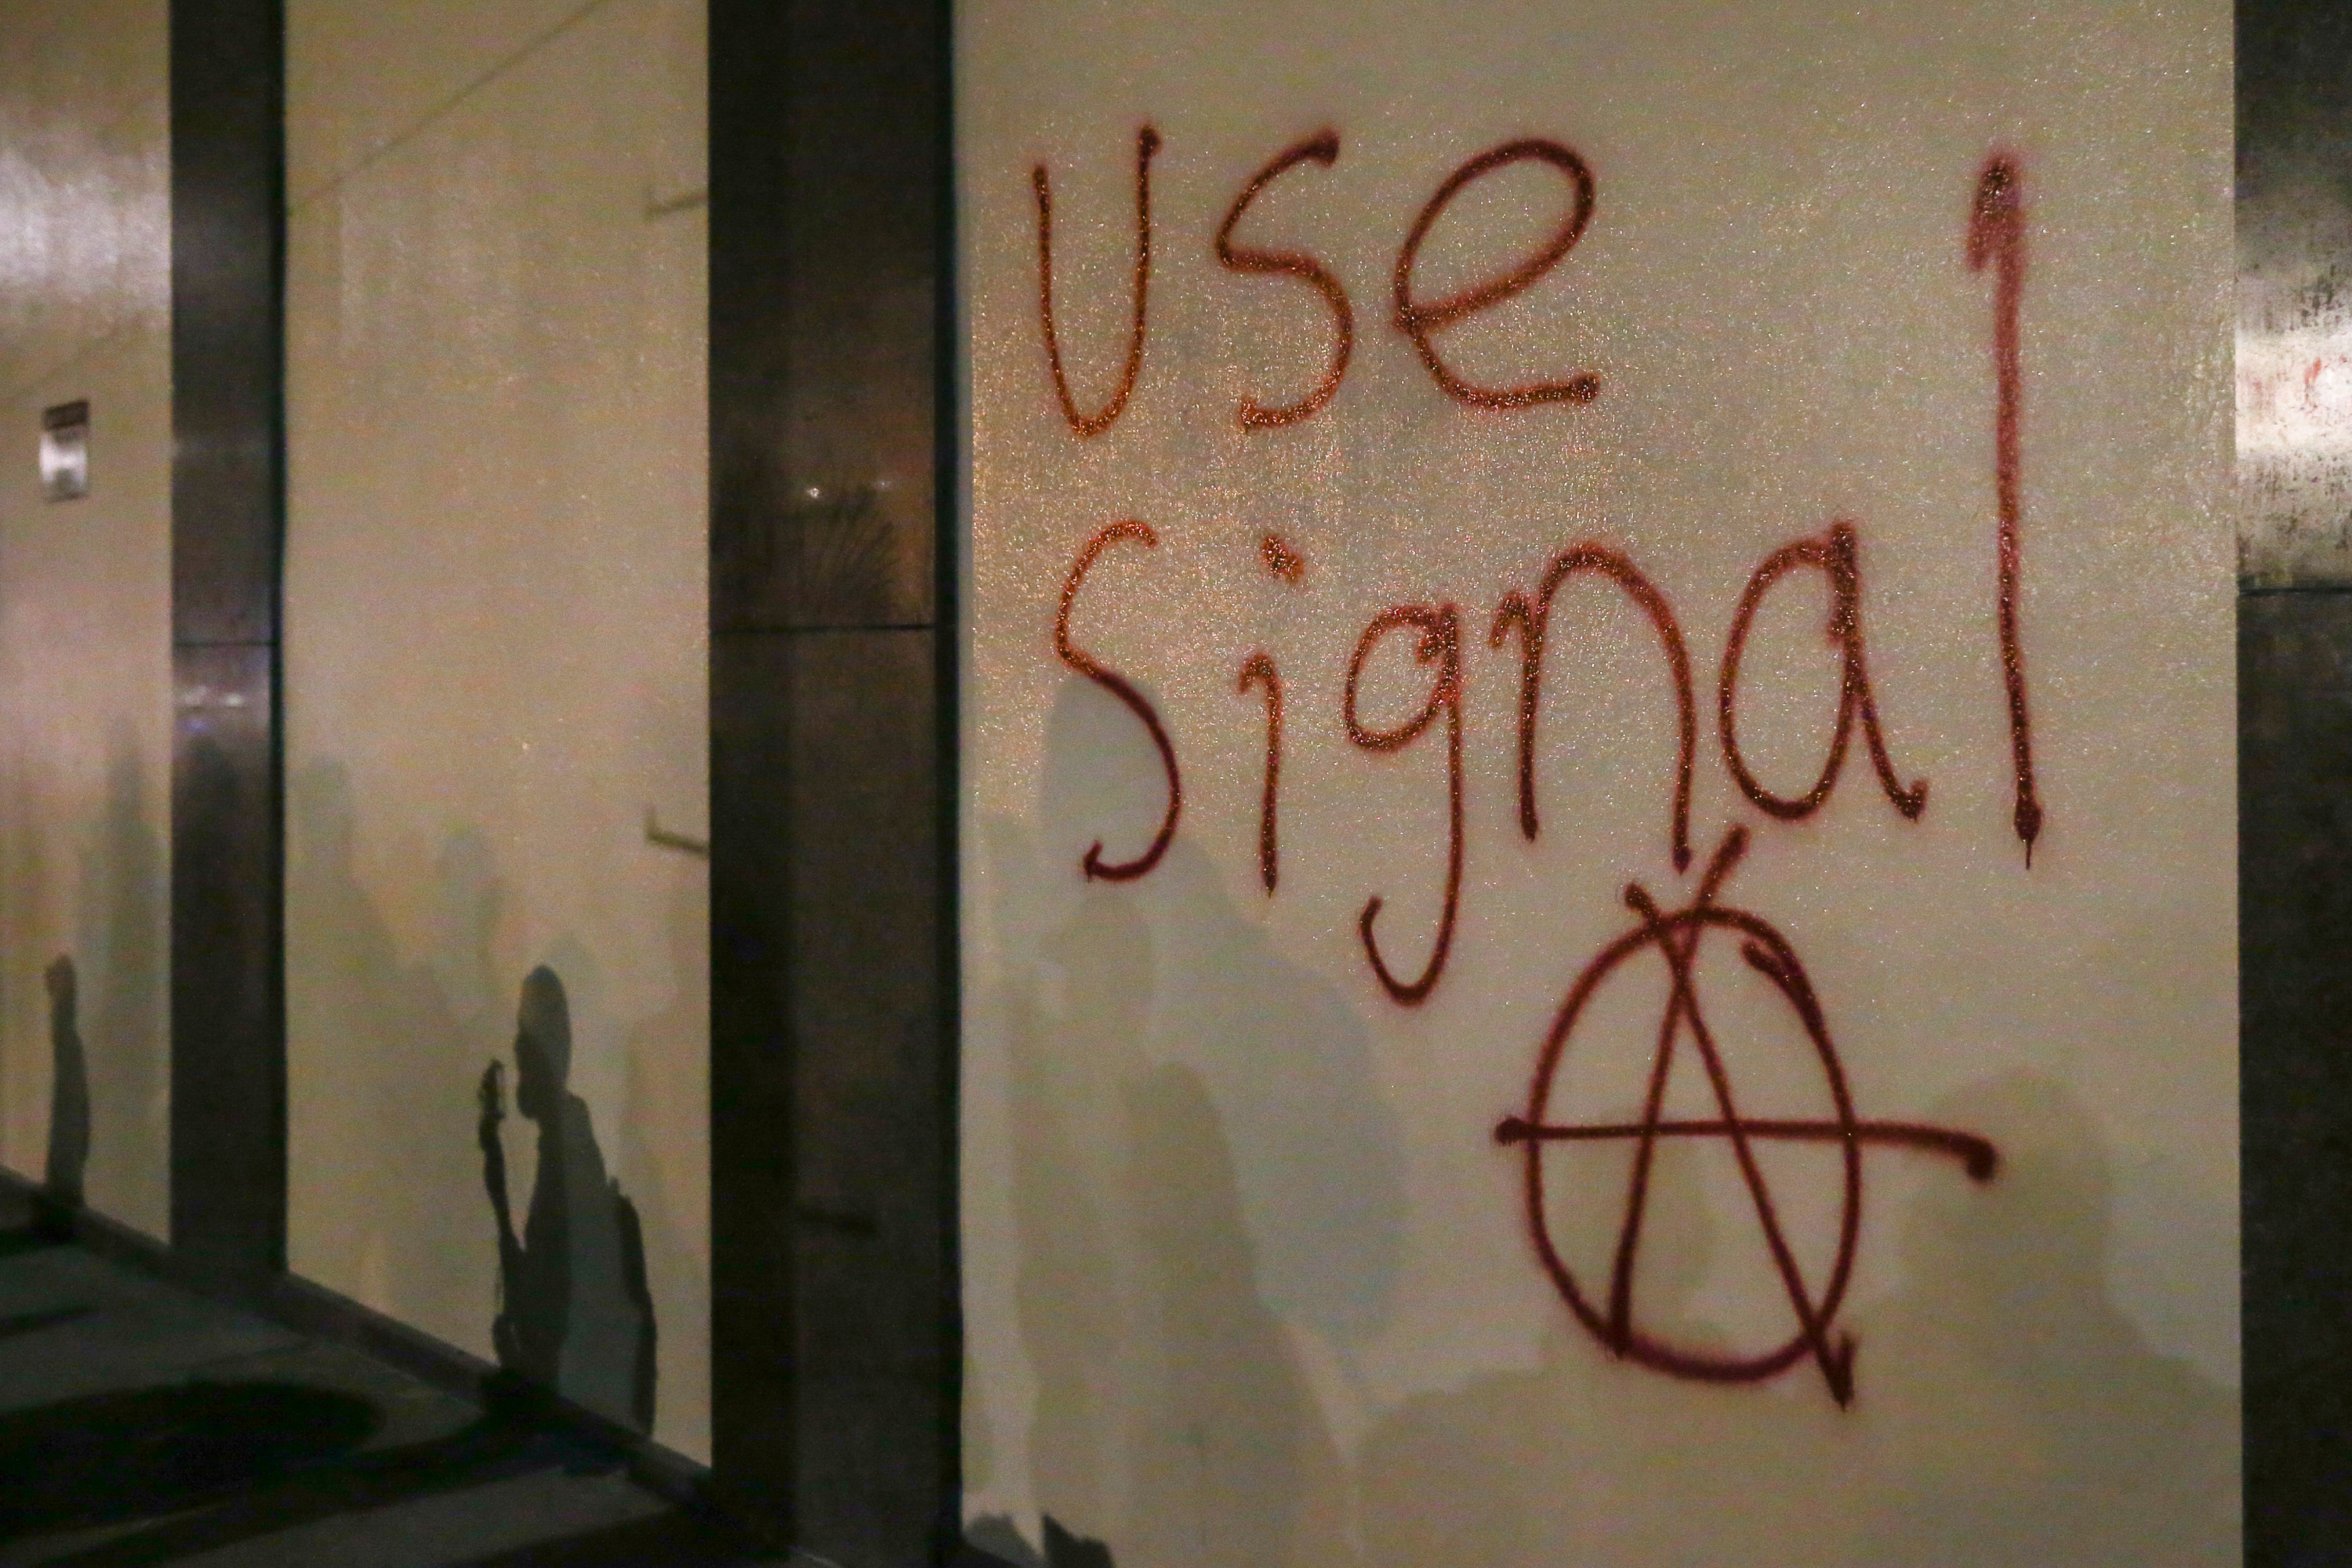 Grafitti urging people to use Signal is spray-painted on a wall during a protest on February 1, 2017 at UC Berkeley, California. (Elijah Nouvelage/Getty Images)